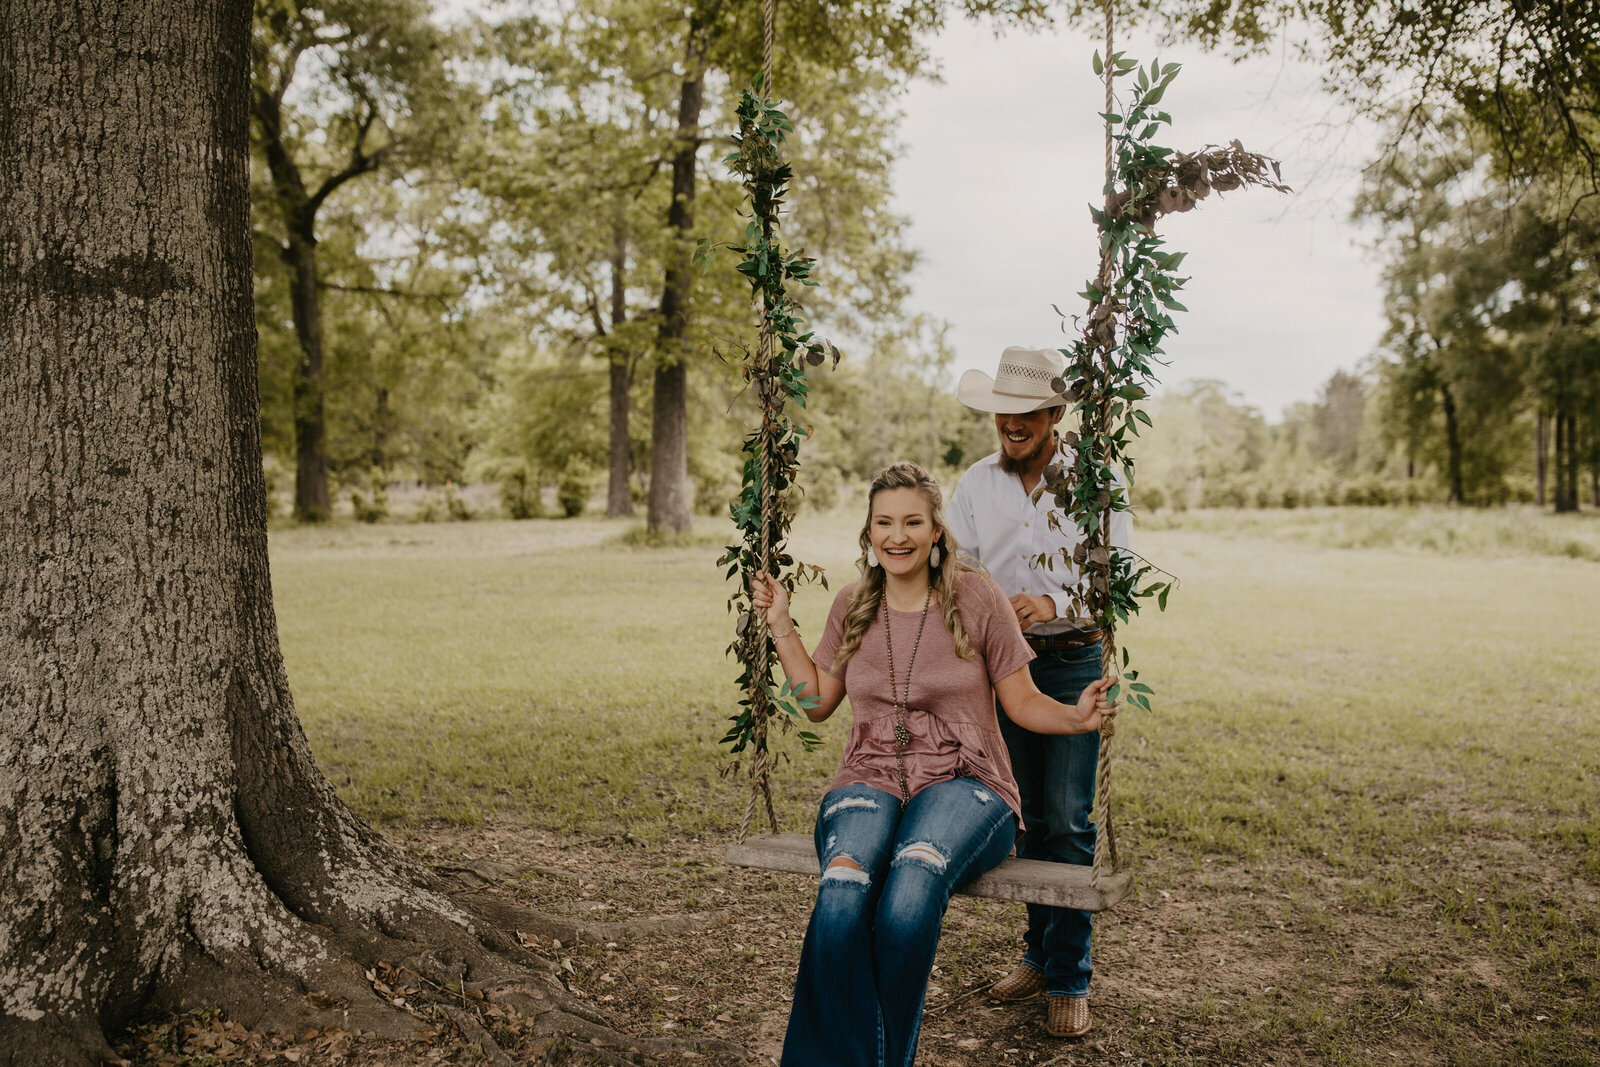 Engagement session at The Carriage House in Conroe, Texas